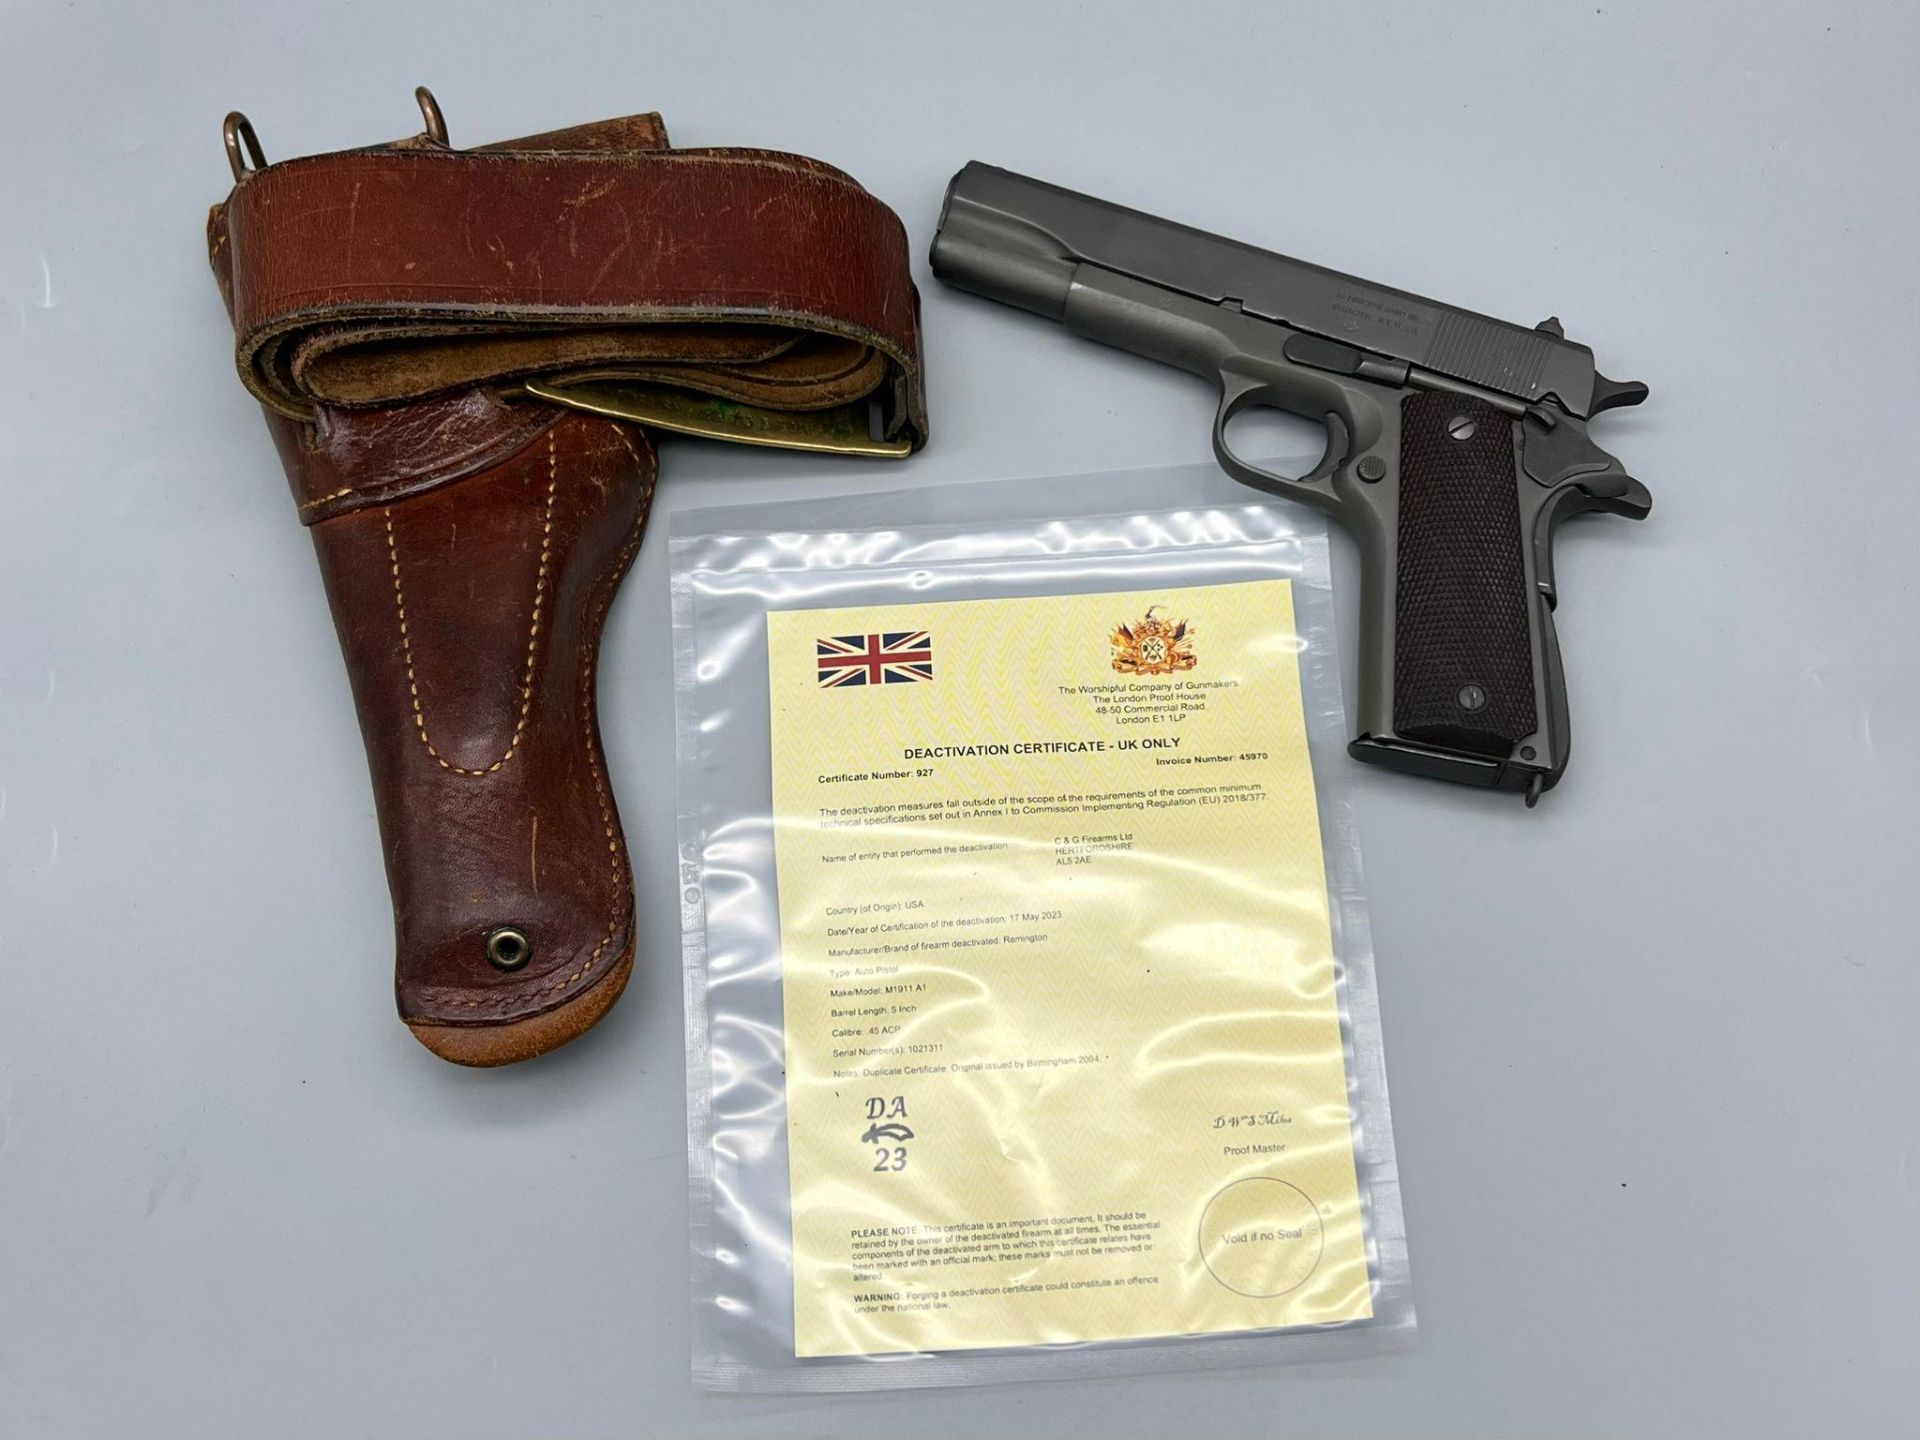 A Rare WW2 1943 Remington Rand M1911 Deactivated Pistol. This USA Army masterpiece has a .45 ACP and